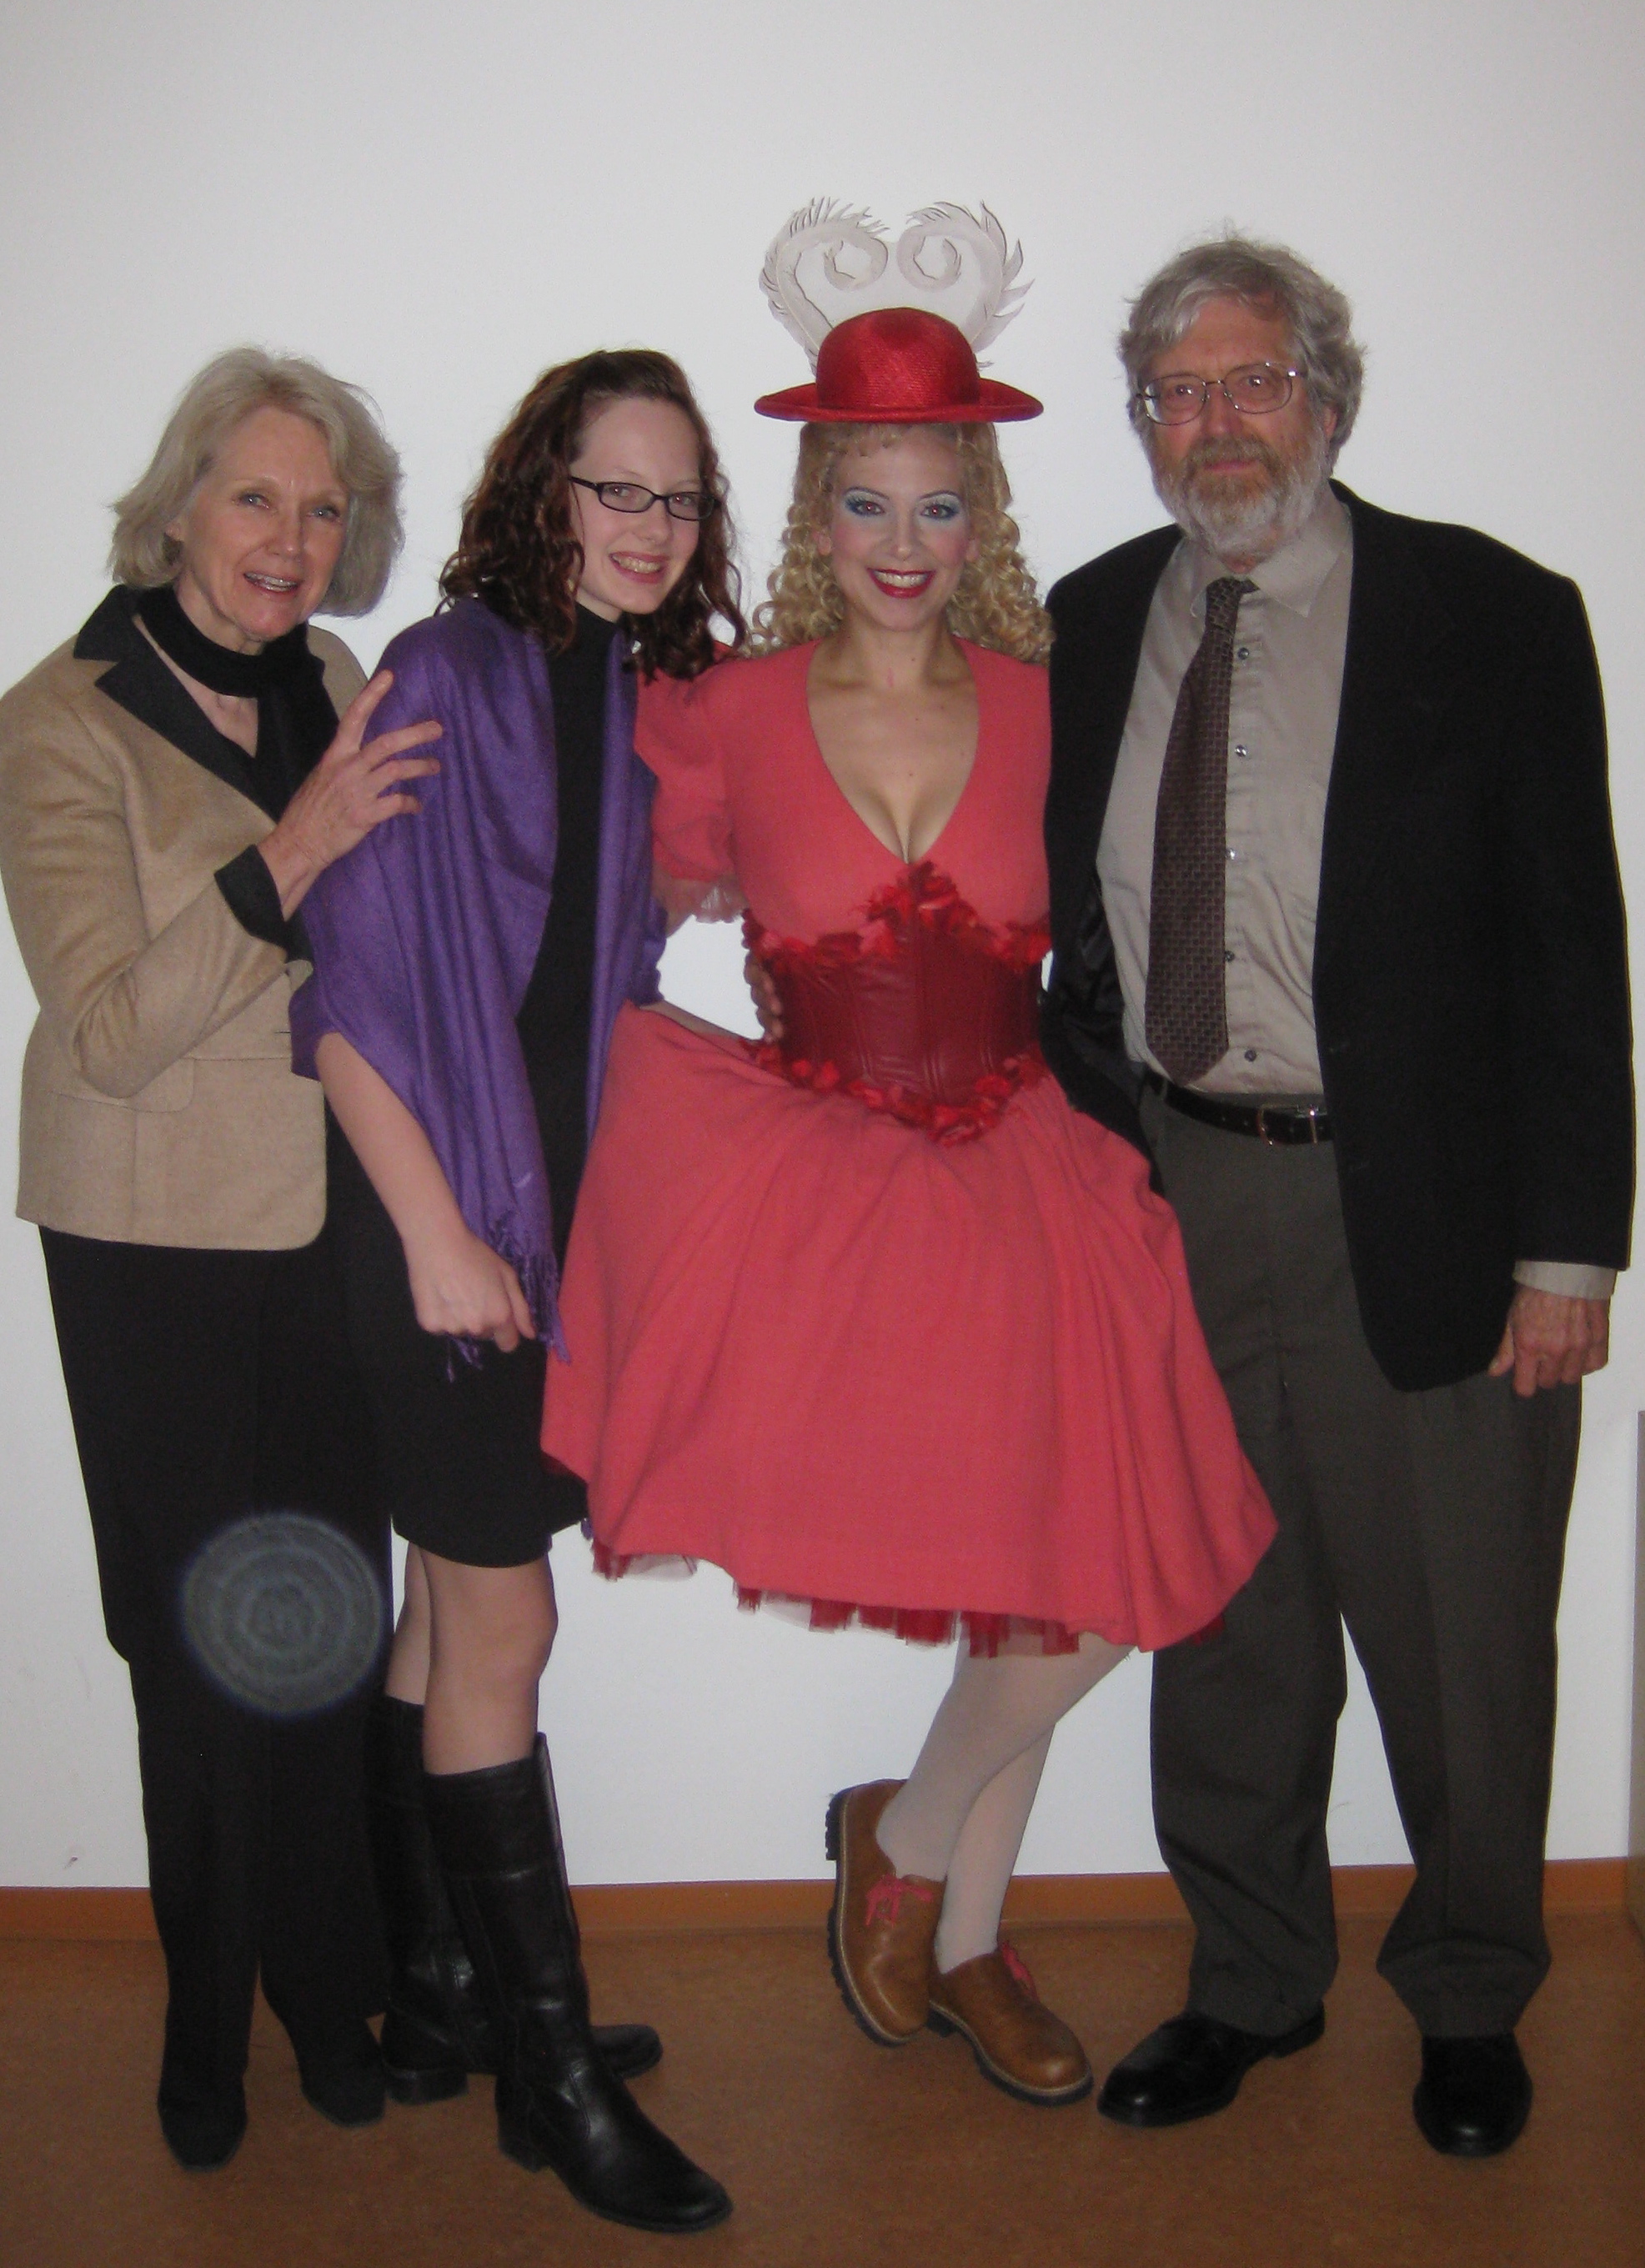 Jennifer Porto poses in a pink dress costume with Carl and Patricia Bleyle.